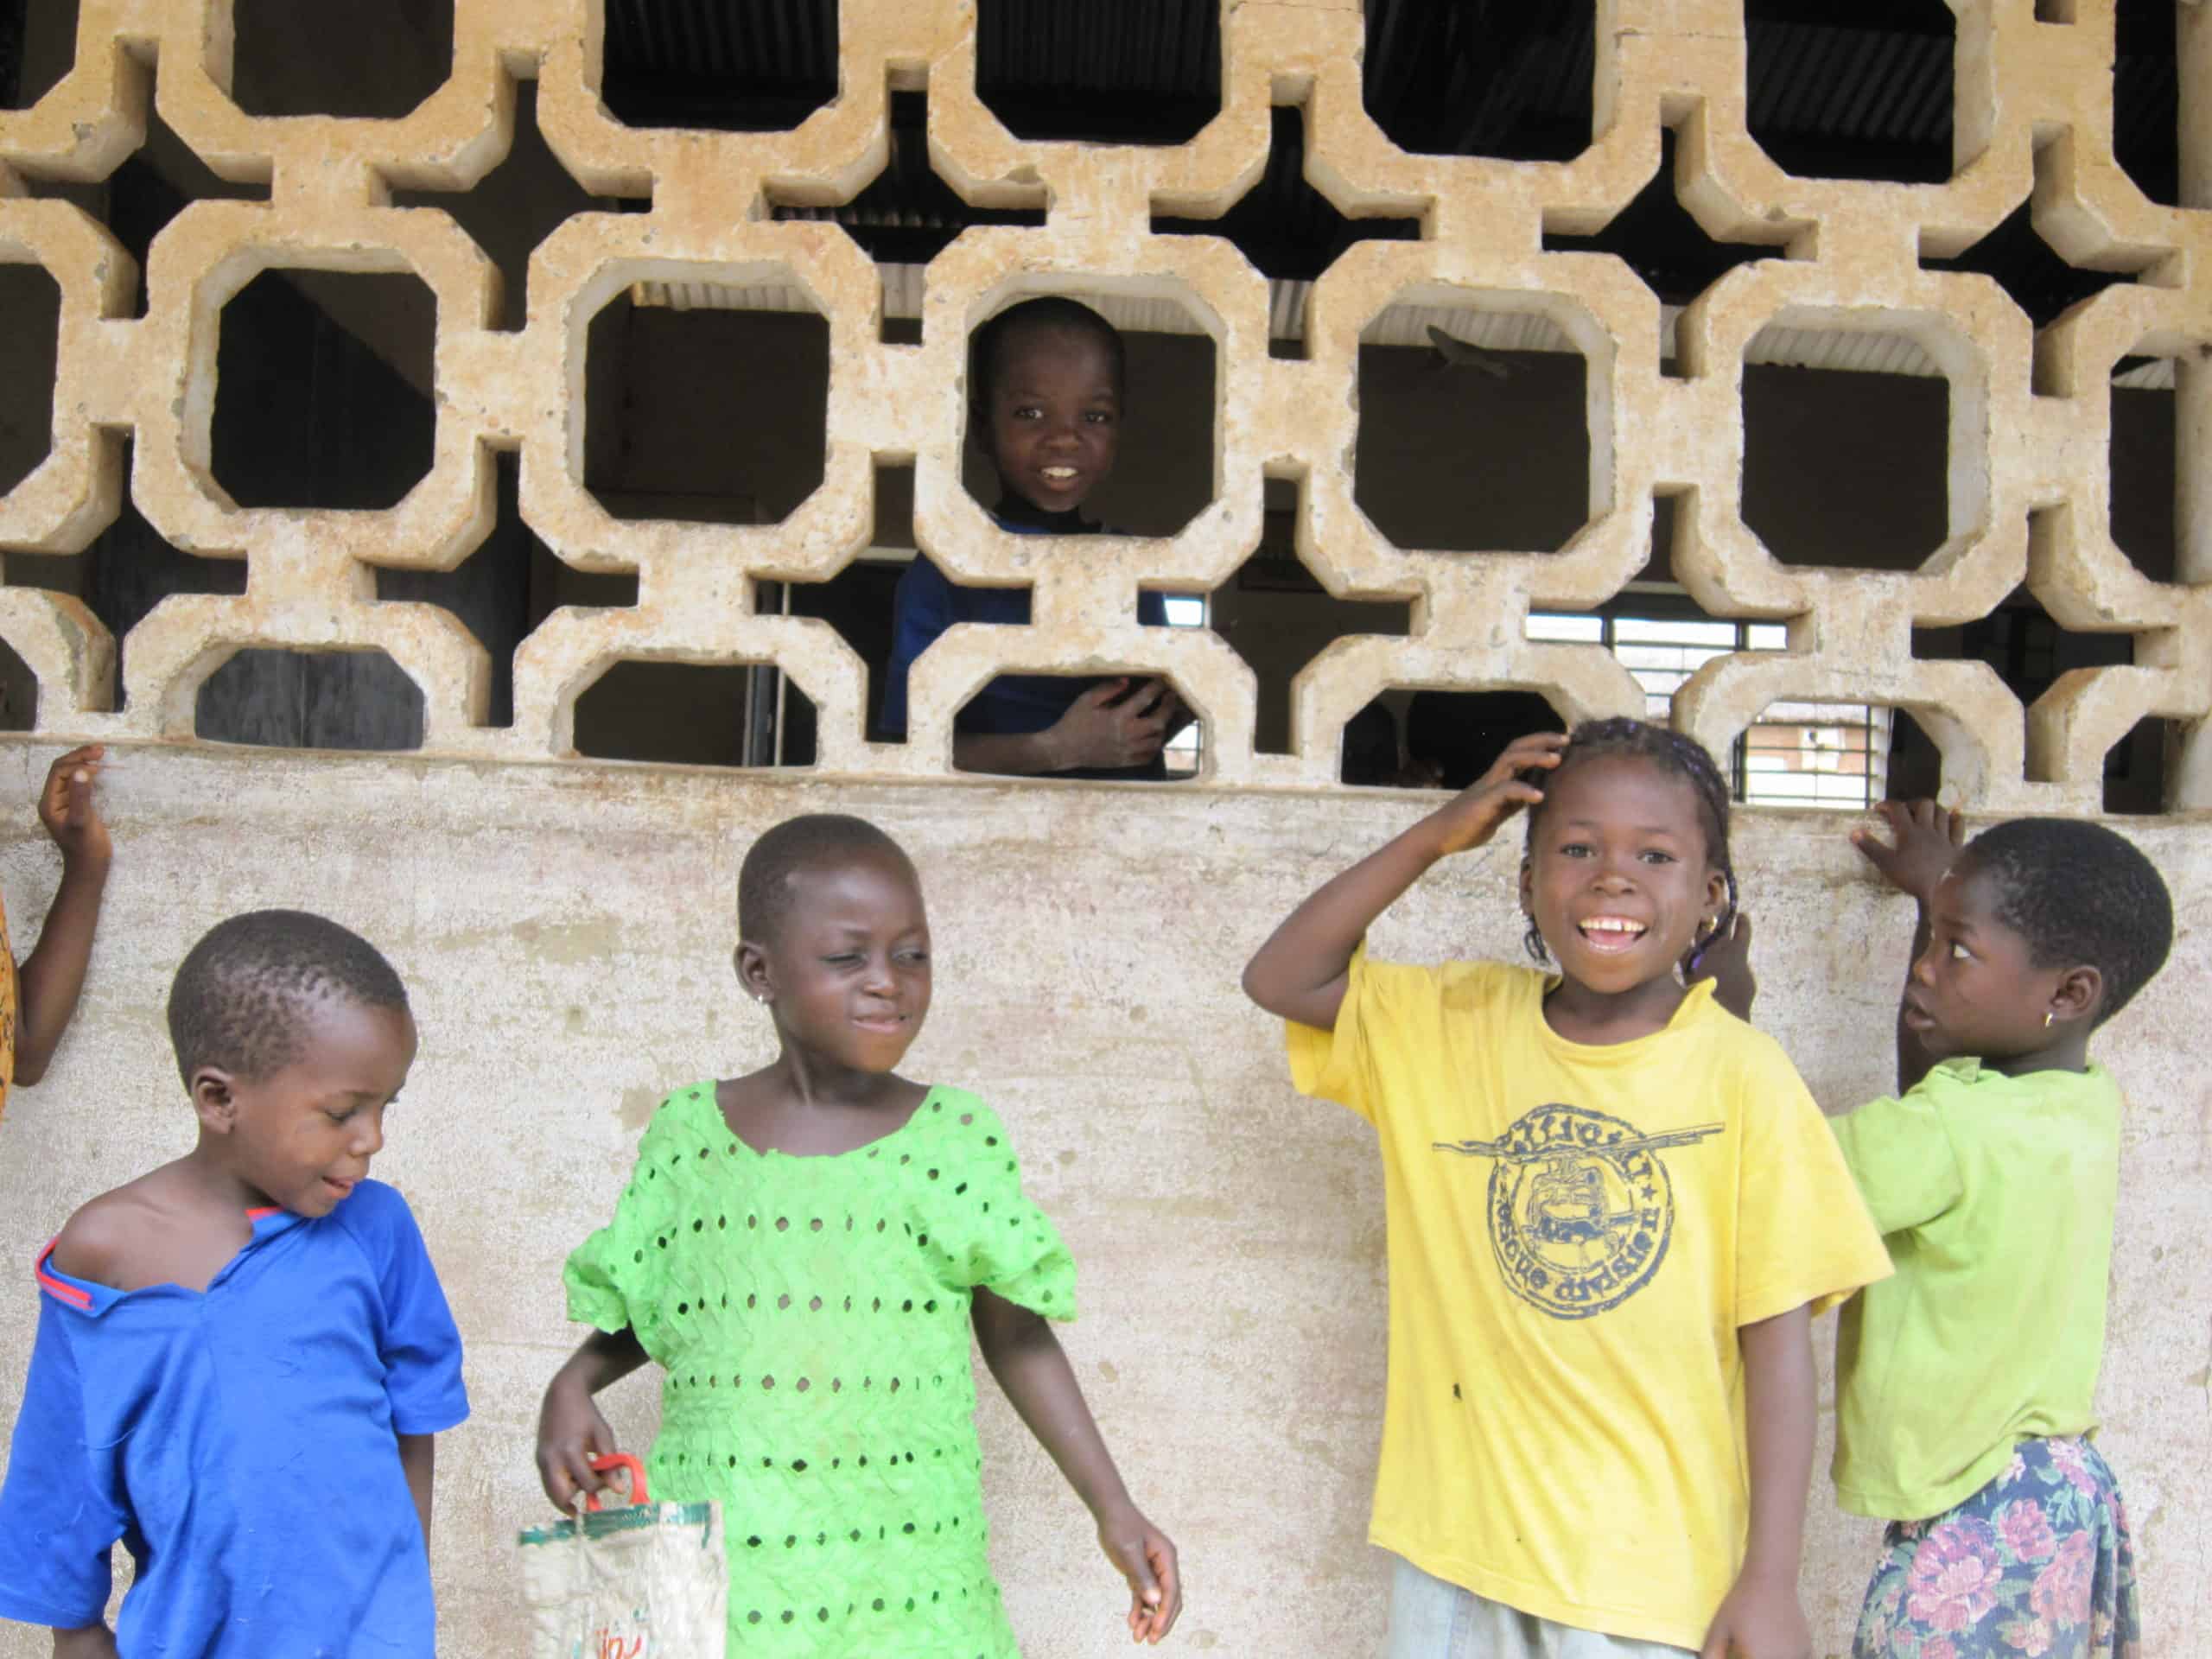 Children’s Radio Programs in Benin Keep Students Engaged at a Distance